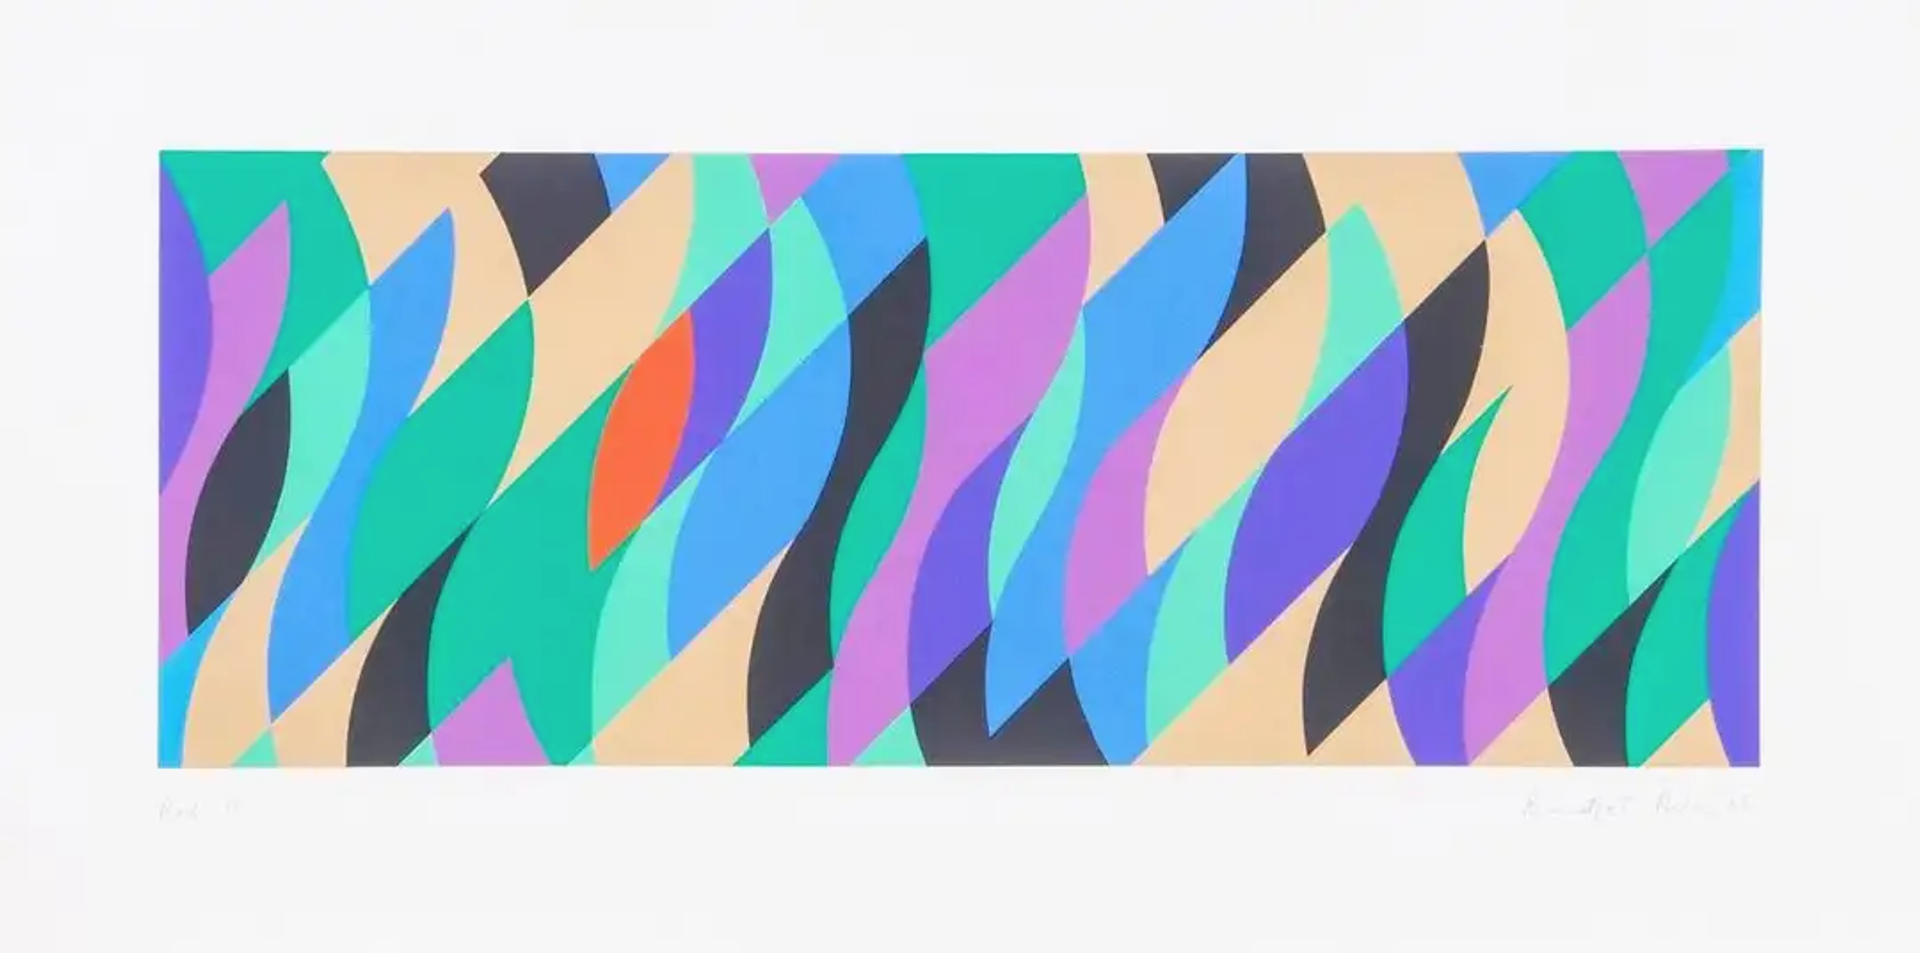 An image of a print by Bridget Riley, showing a variety of wavy geometric shapes in cool tones.